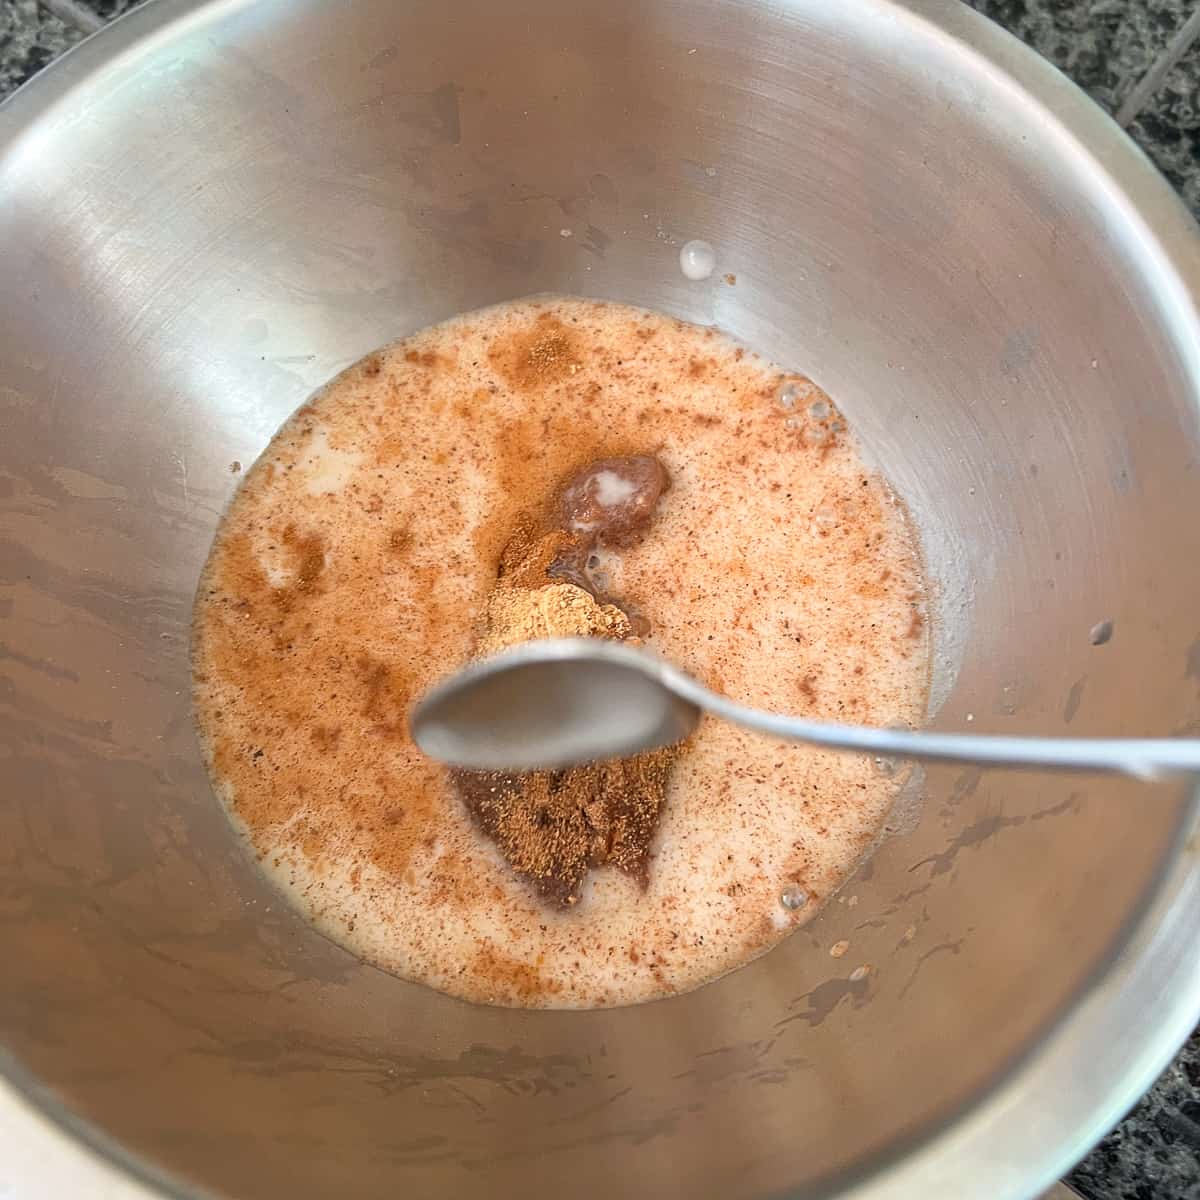 top view of a mixing bowl with a slurry of arrowroot powder, water, date syrup and spices; spoon in position to stir it